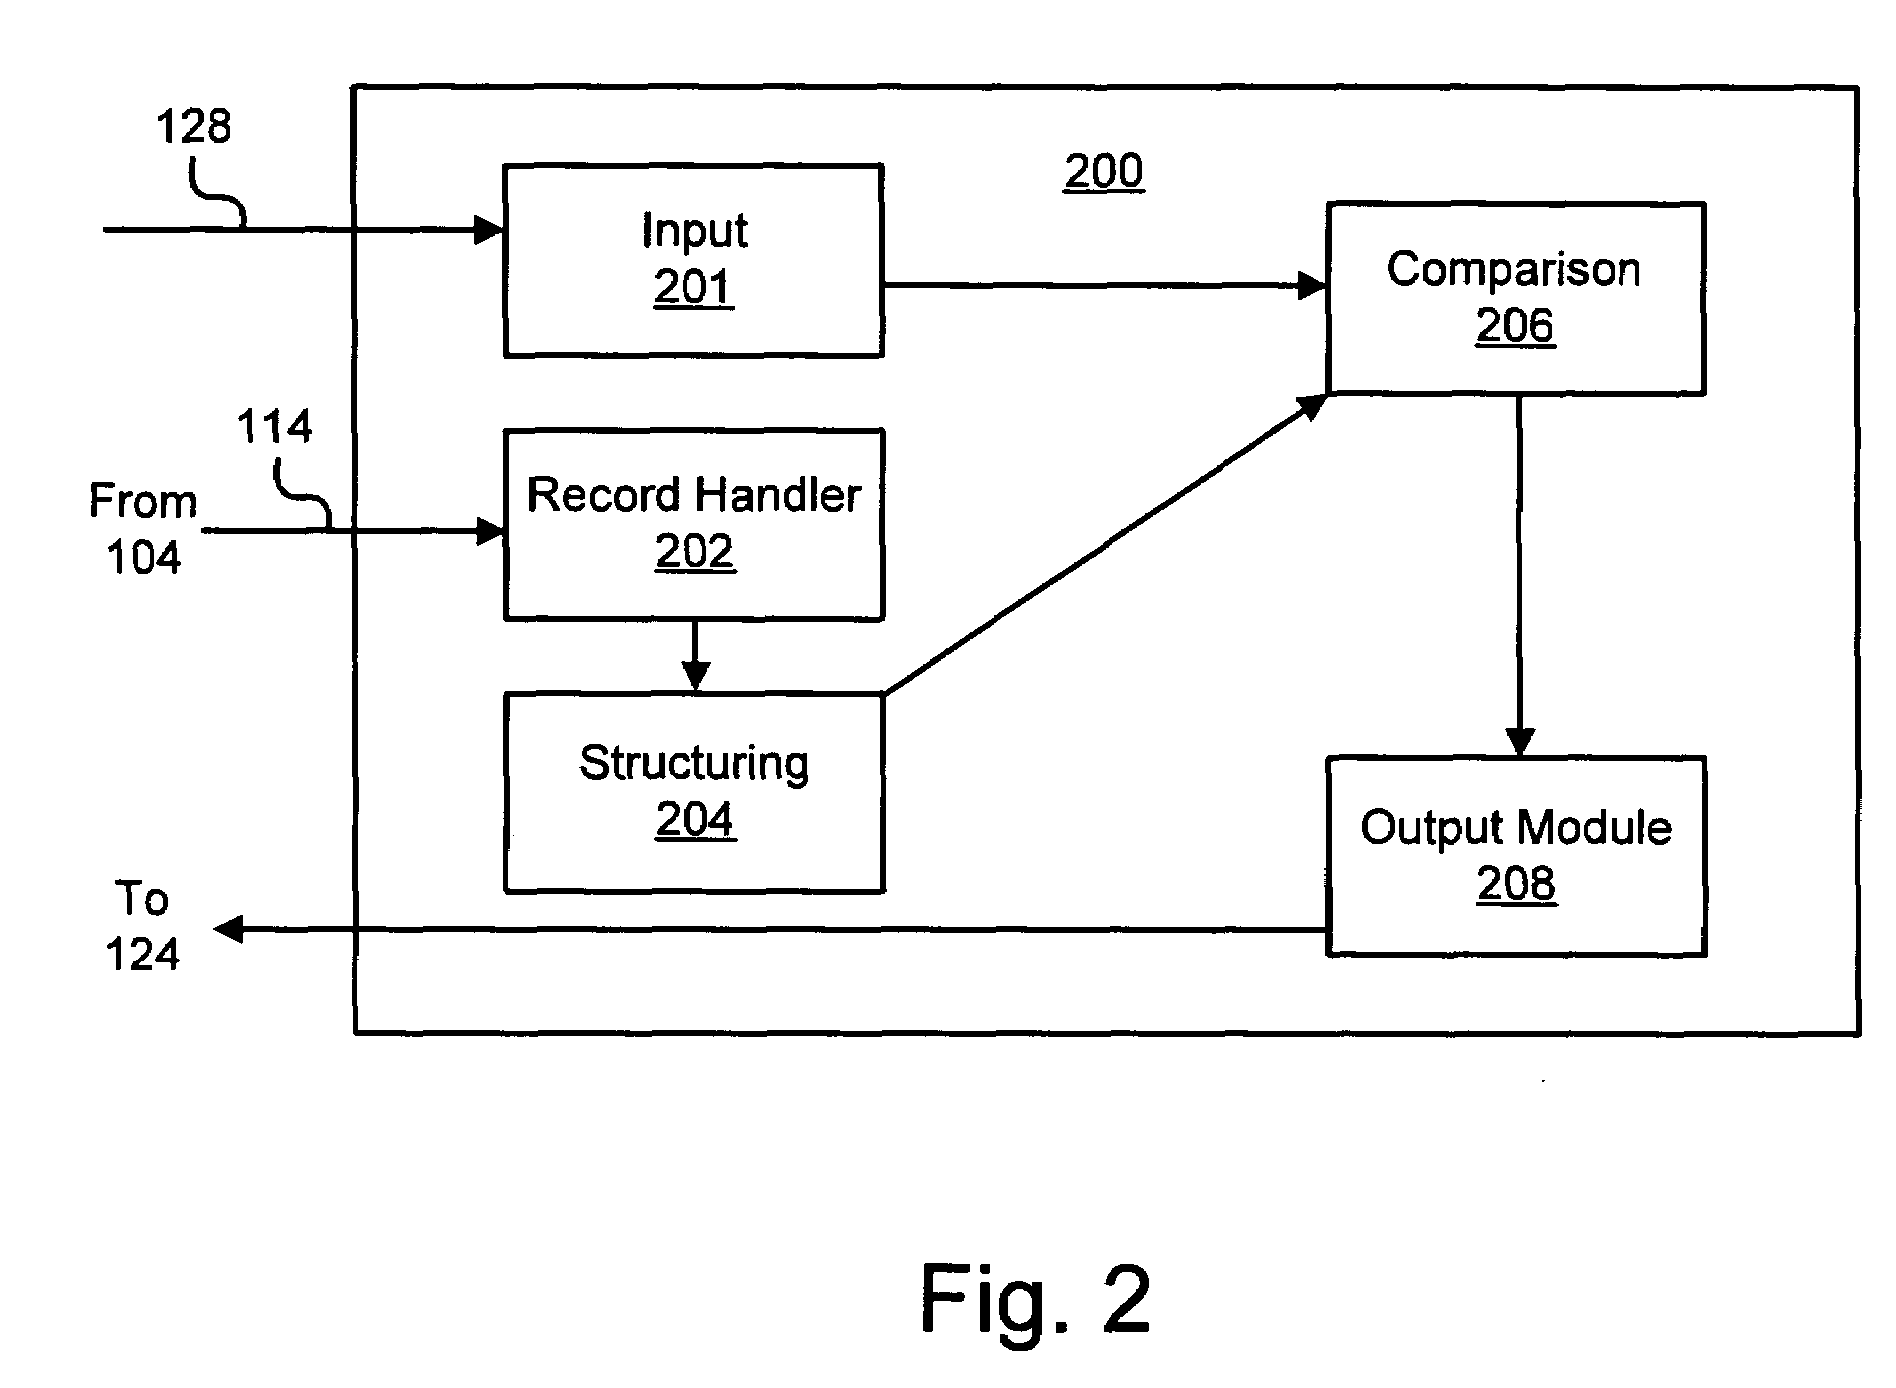 Method for condensing reported checkpoint log data